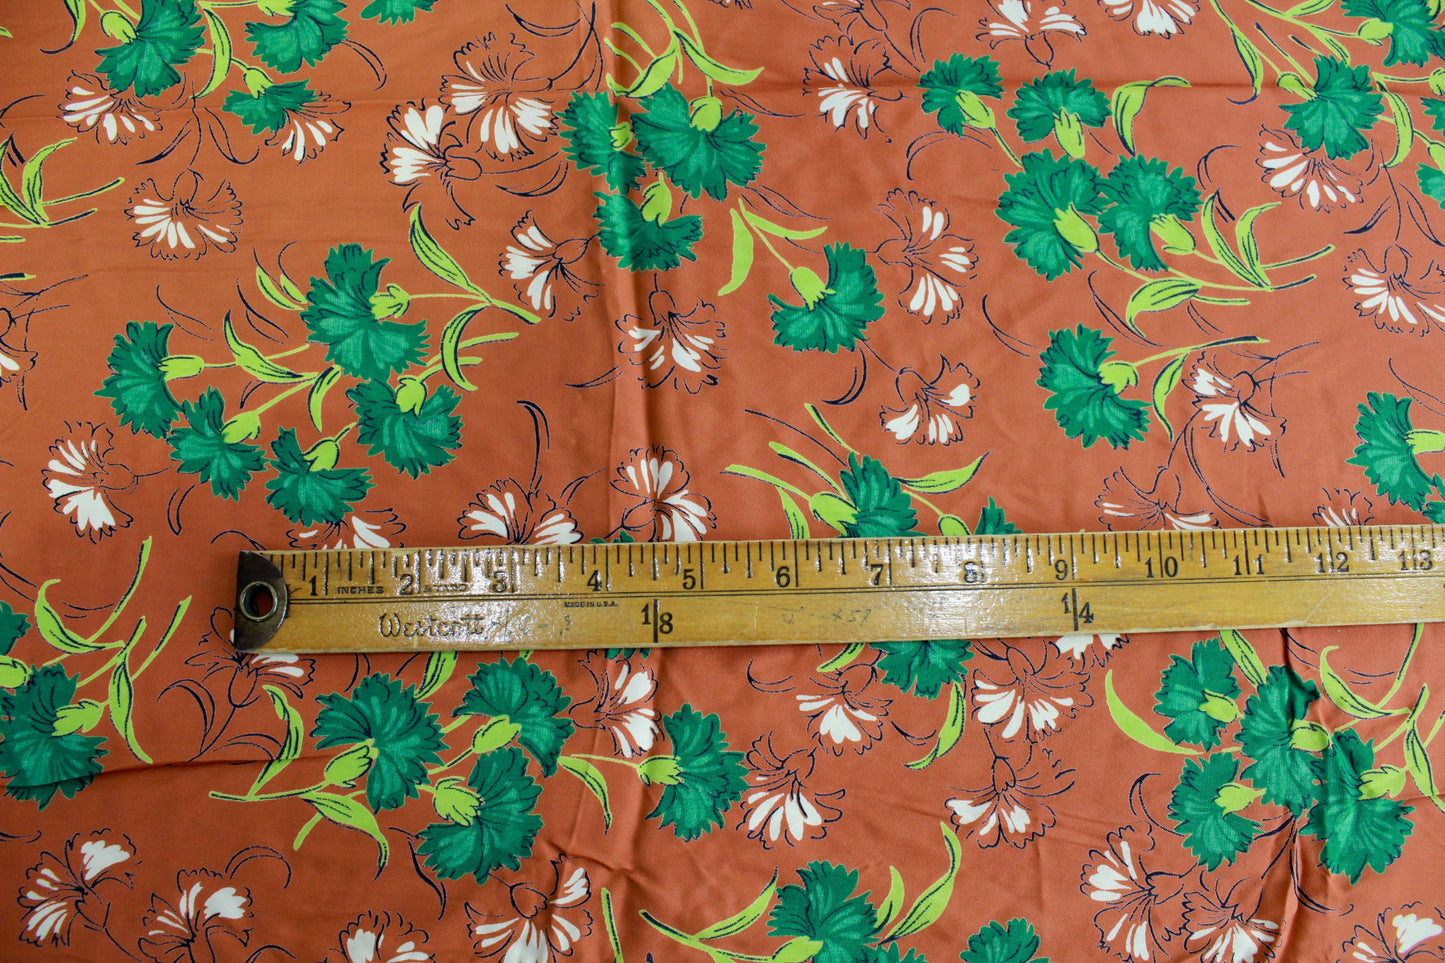 1940s rust brown and green floral print rayon sewing fabric yardage 2.5 yards